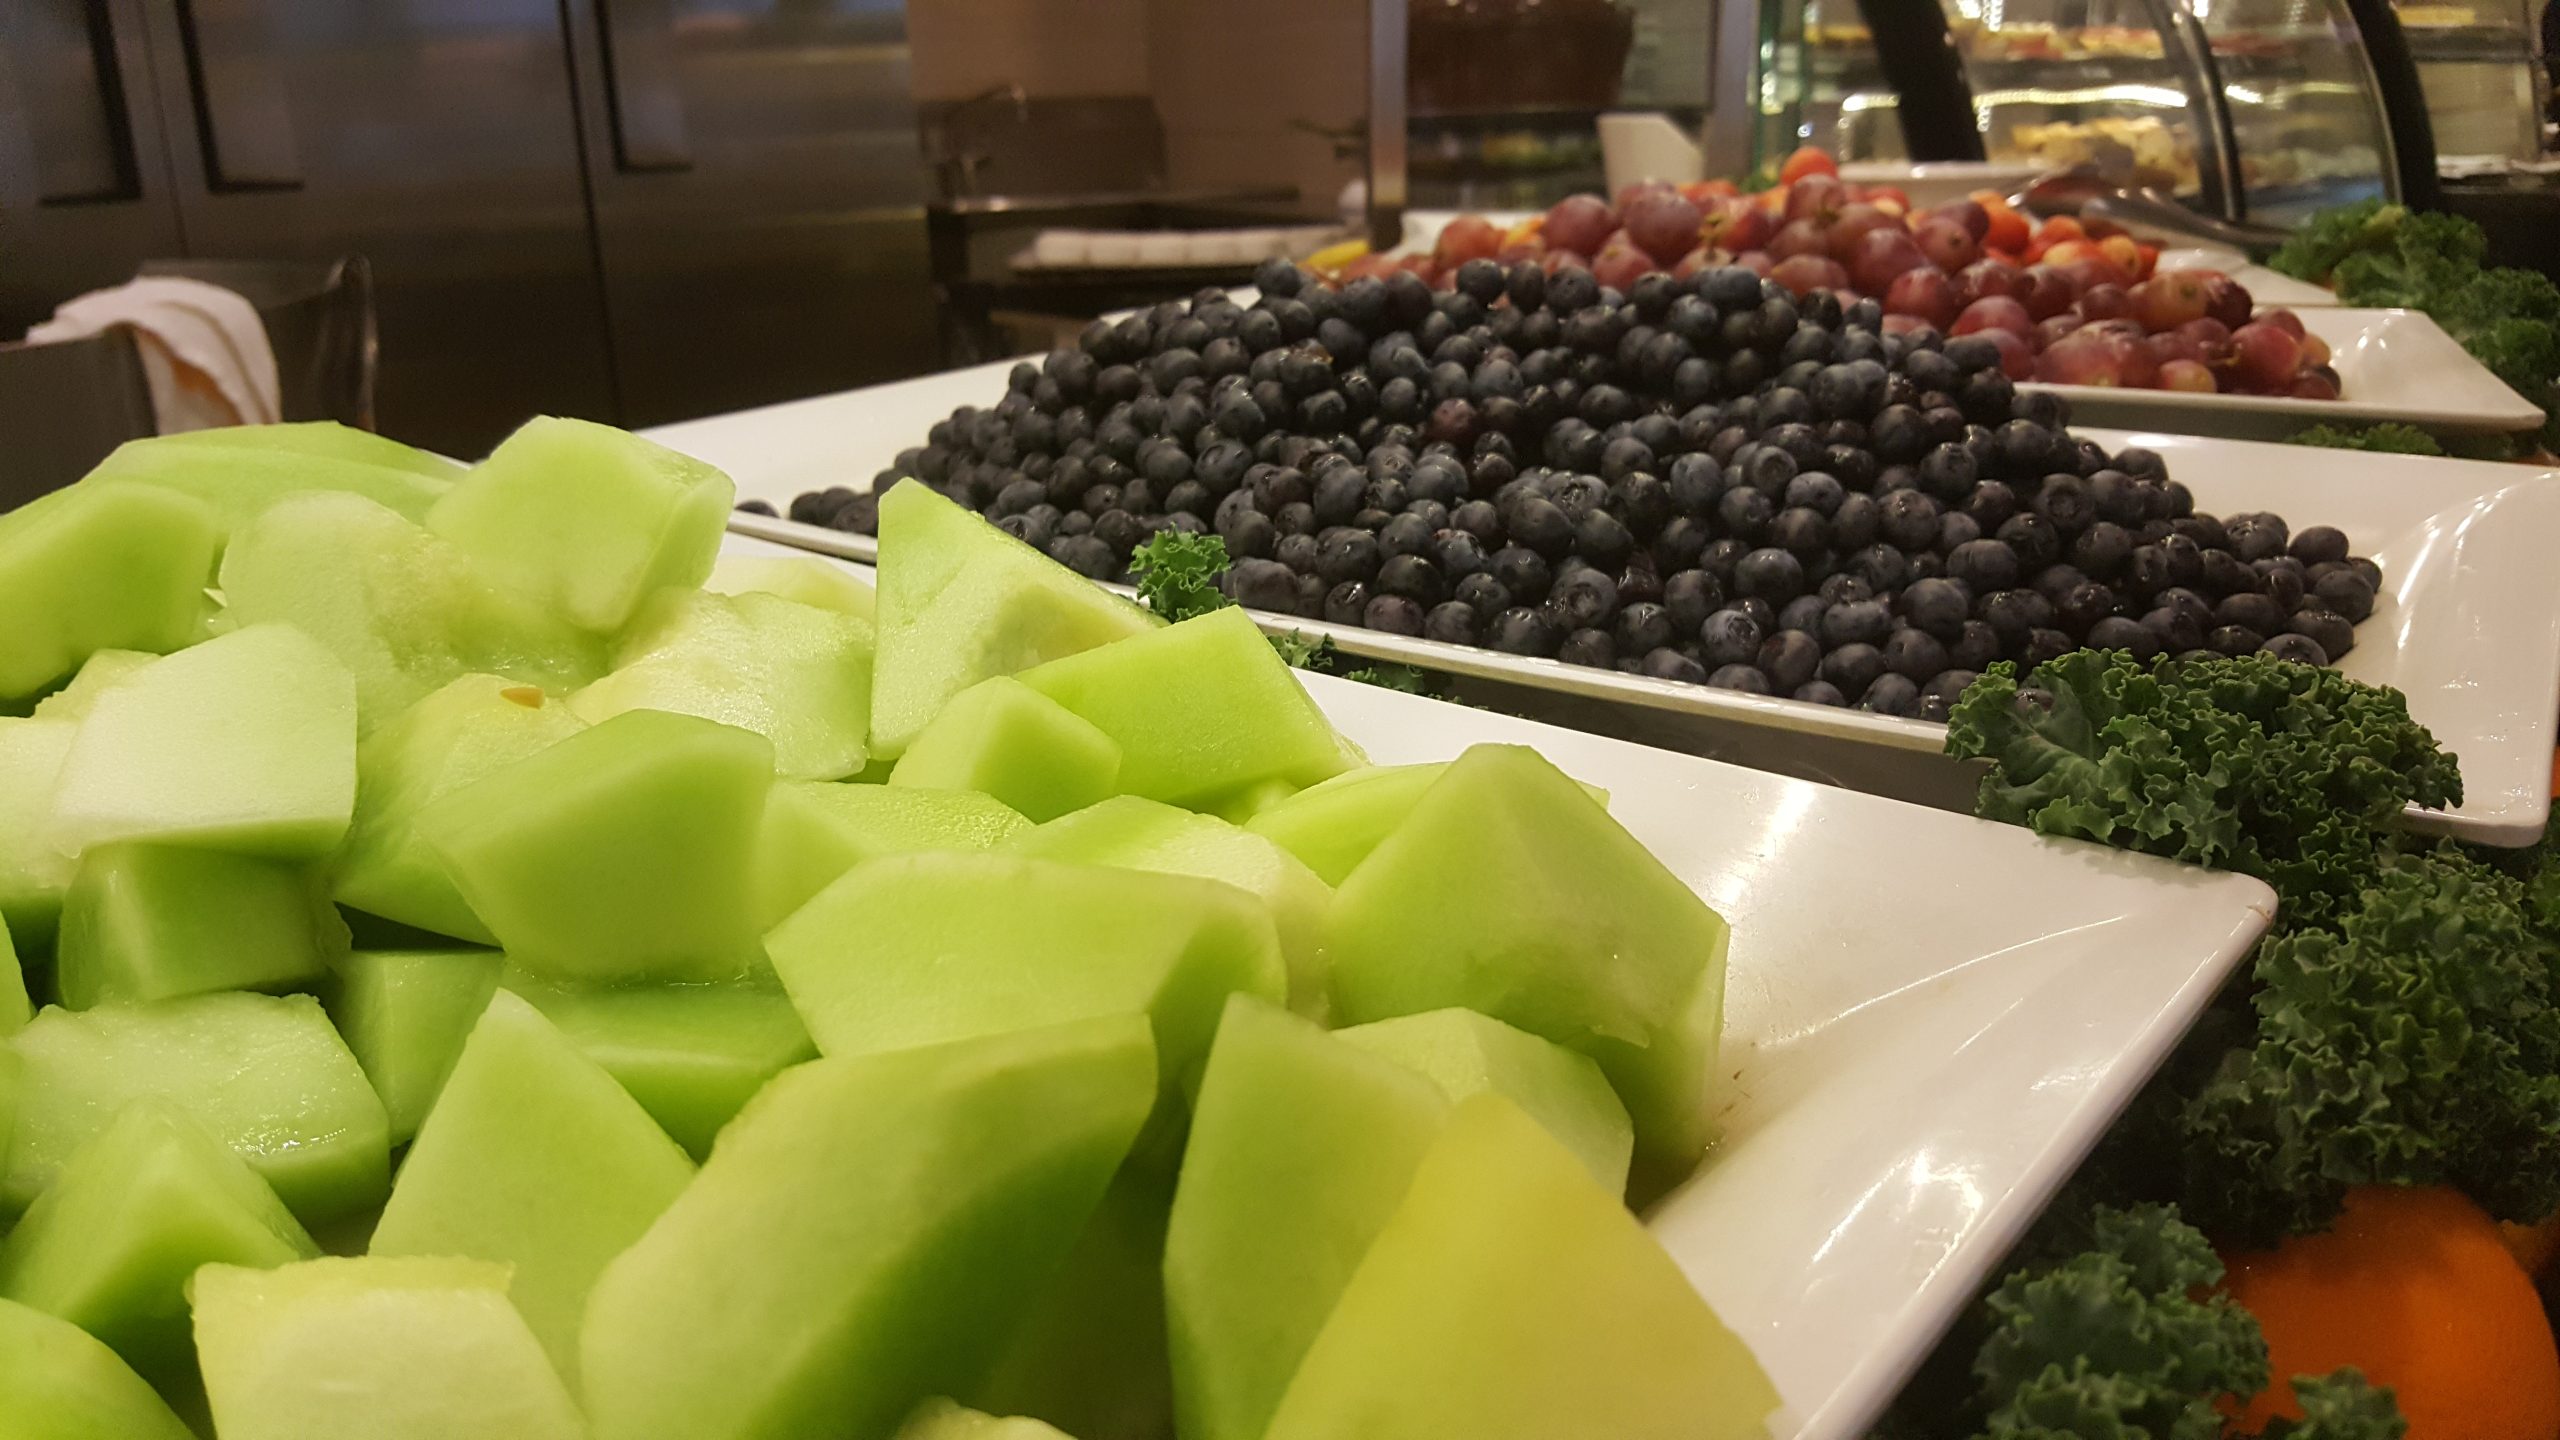 Honeydew melons and blueberries